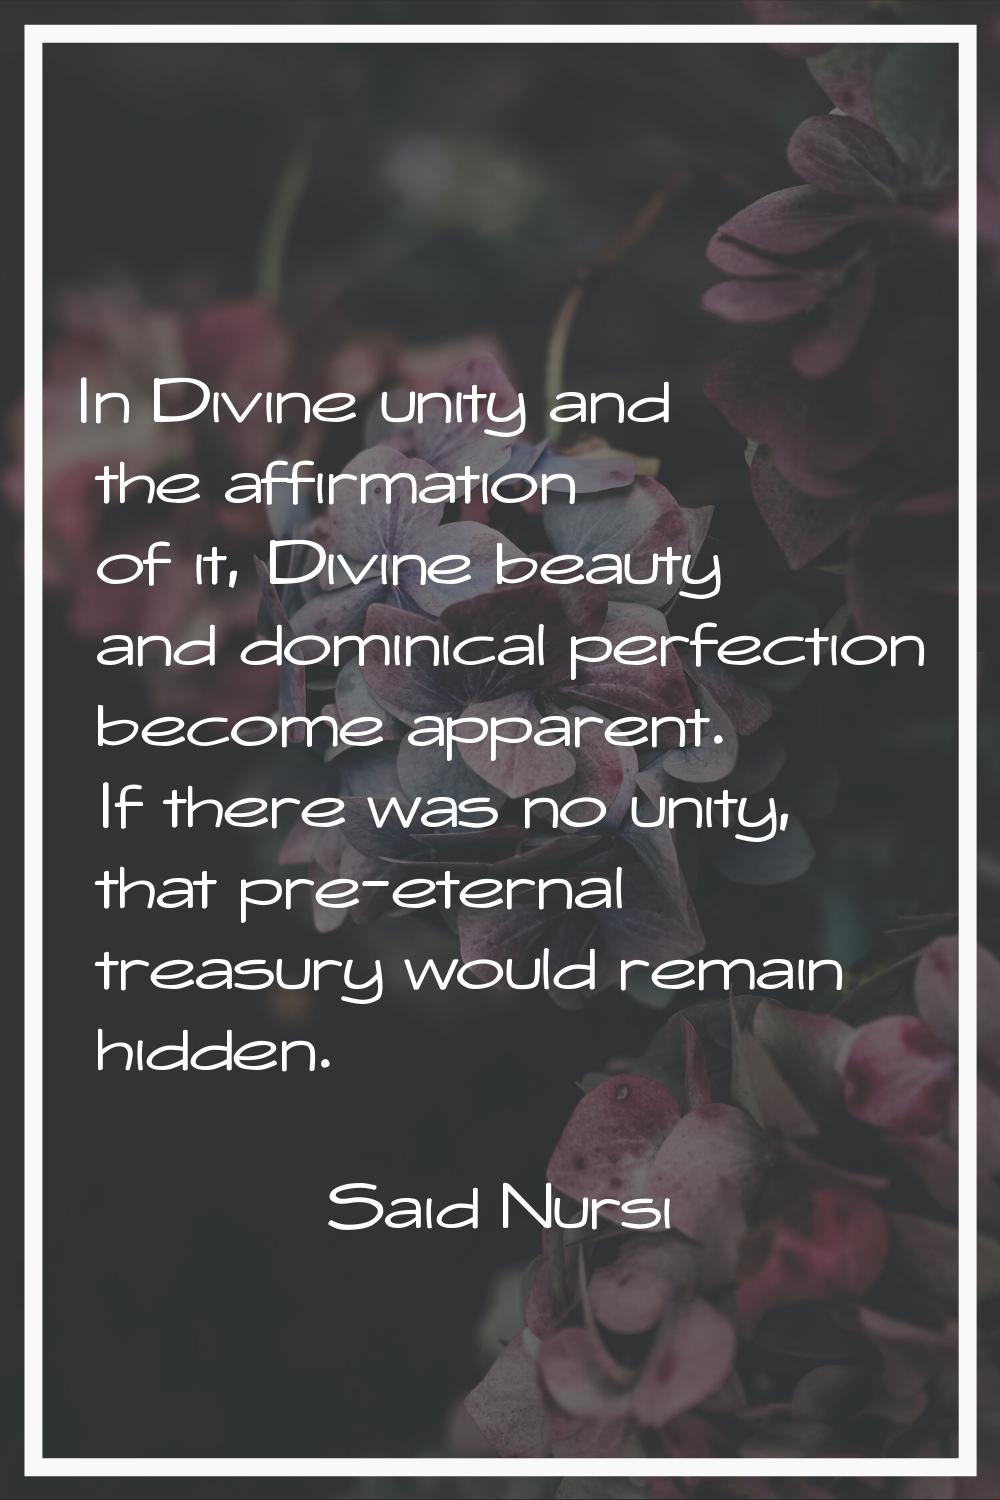 In Divine unity and the affirmation of it, Divine beauty and dominical perfection become apparent. 